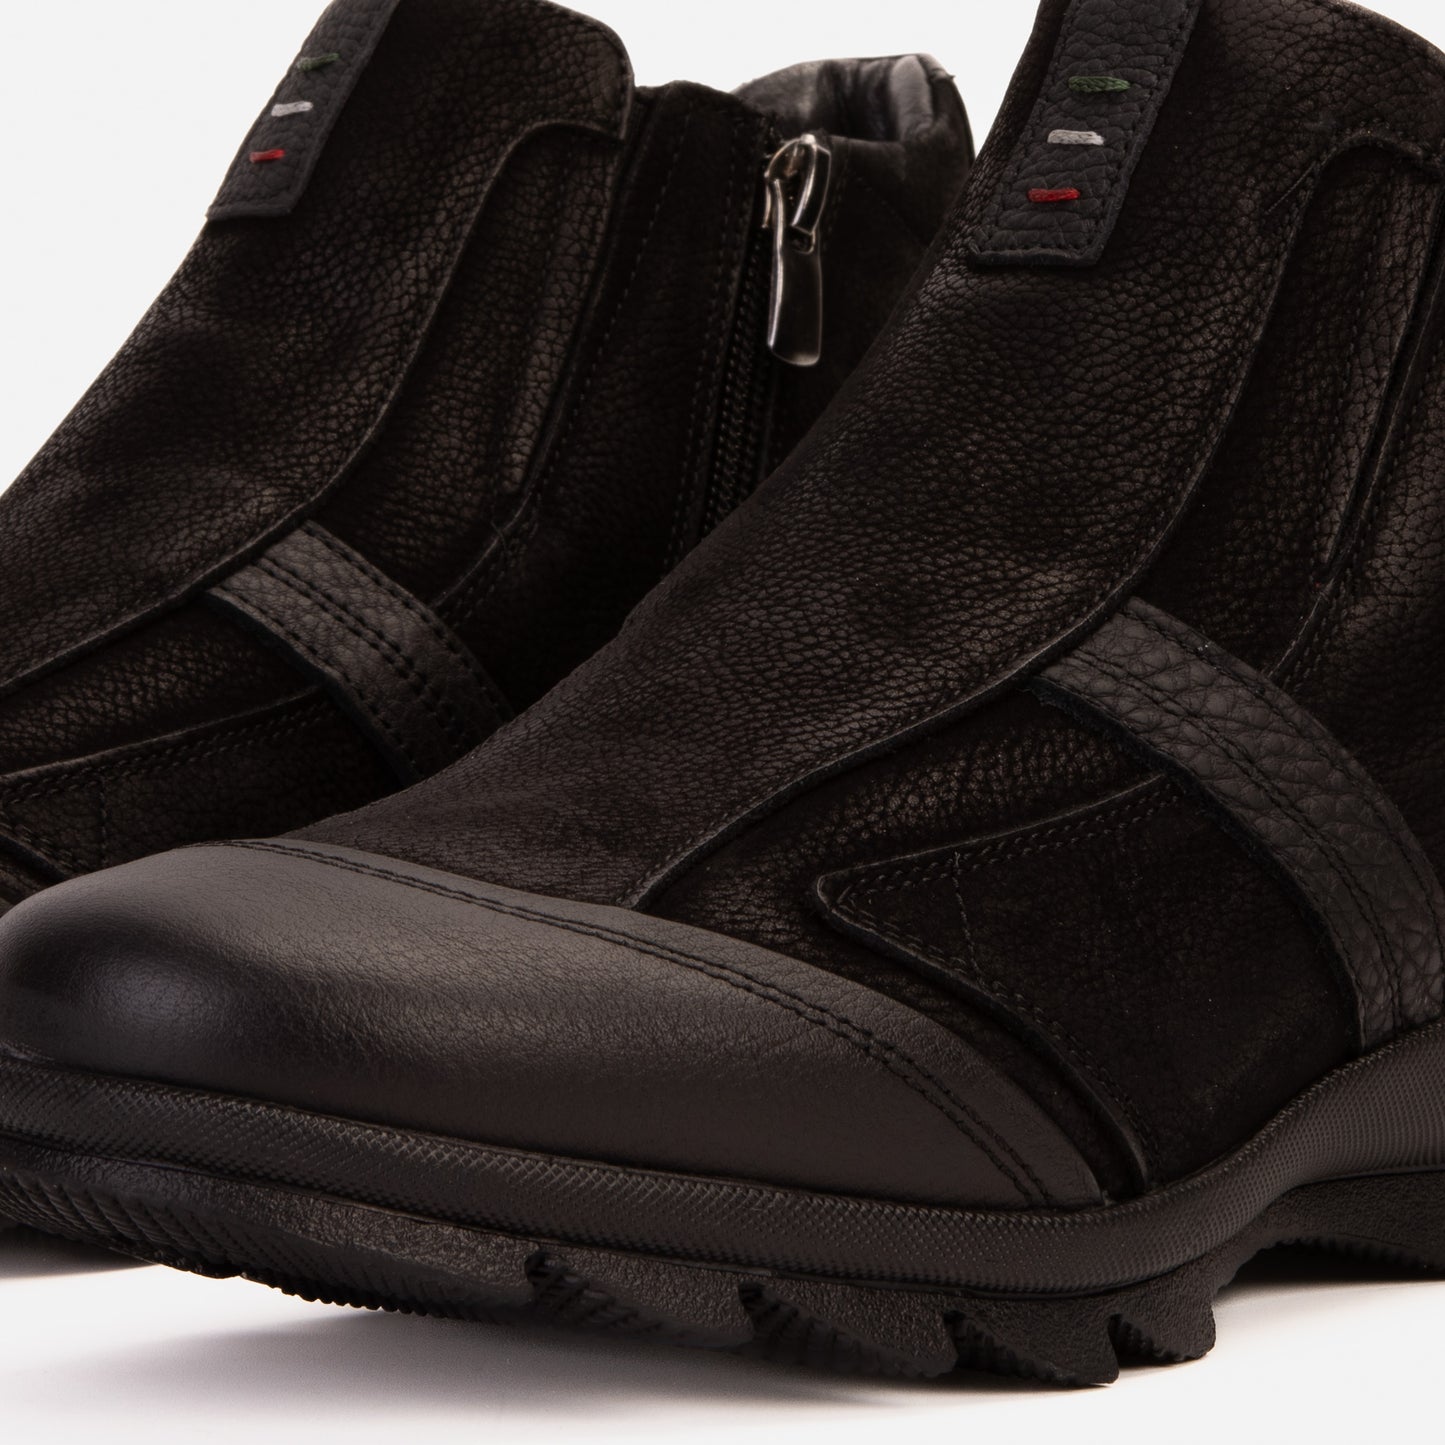 The Montreal Suede Black Leather Casual Zip-Up Ankle Men Boot